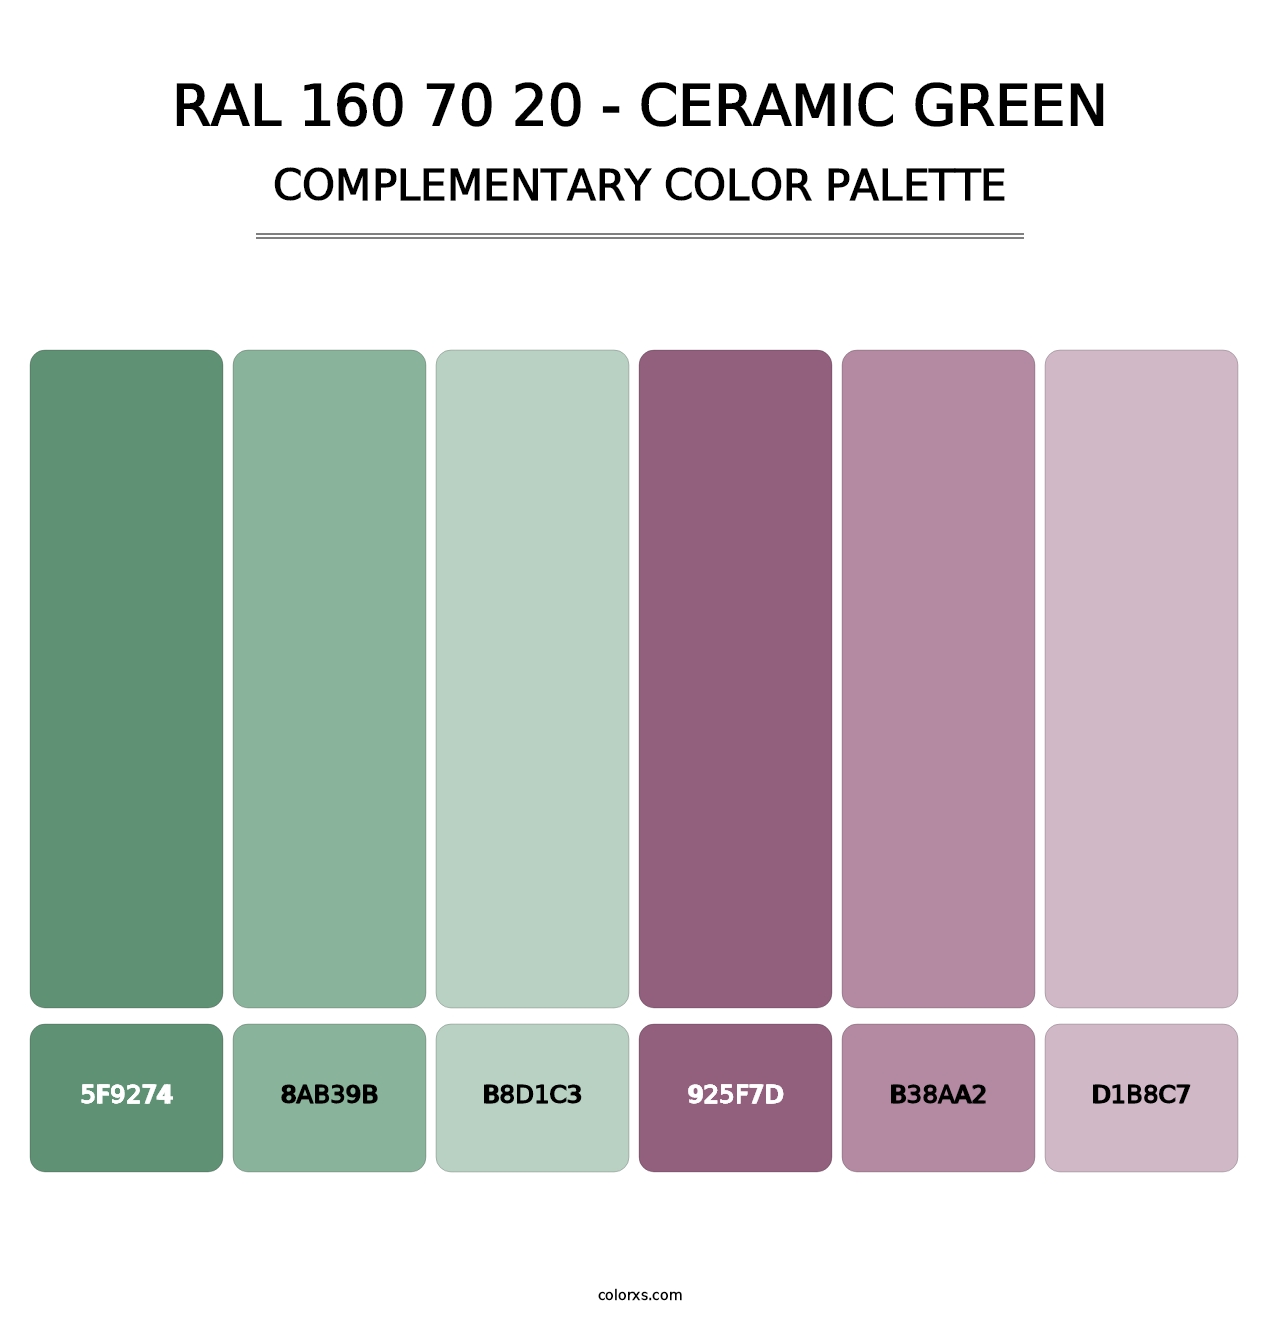 RAL 160 70 20 - Ceramic Green - Complementary Color Palette